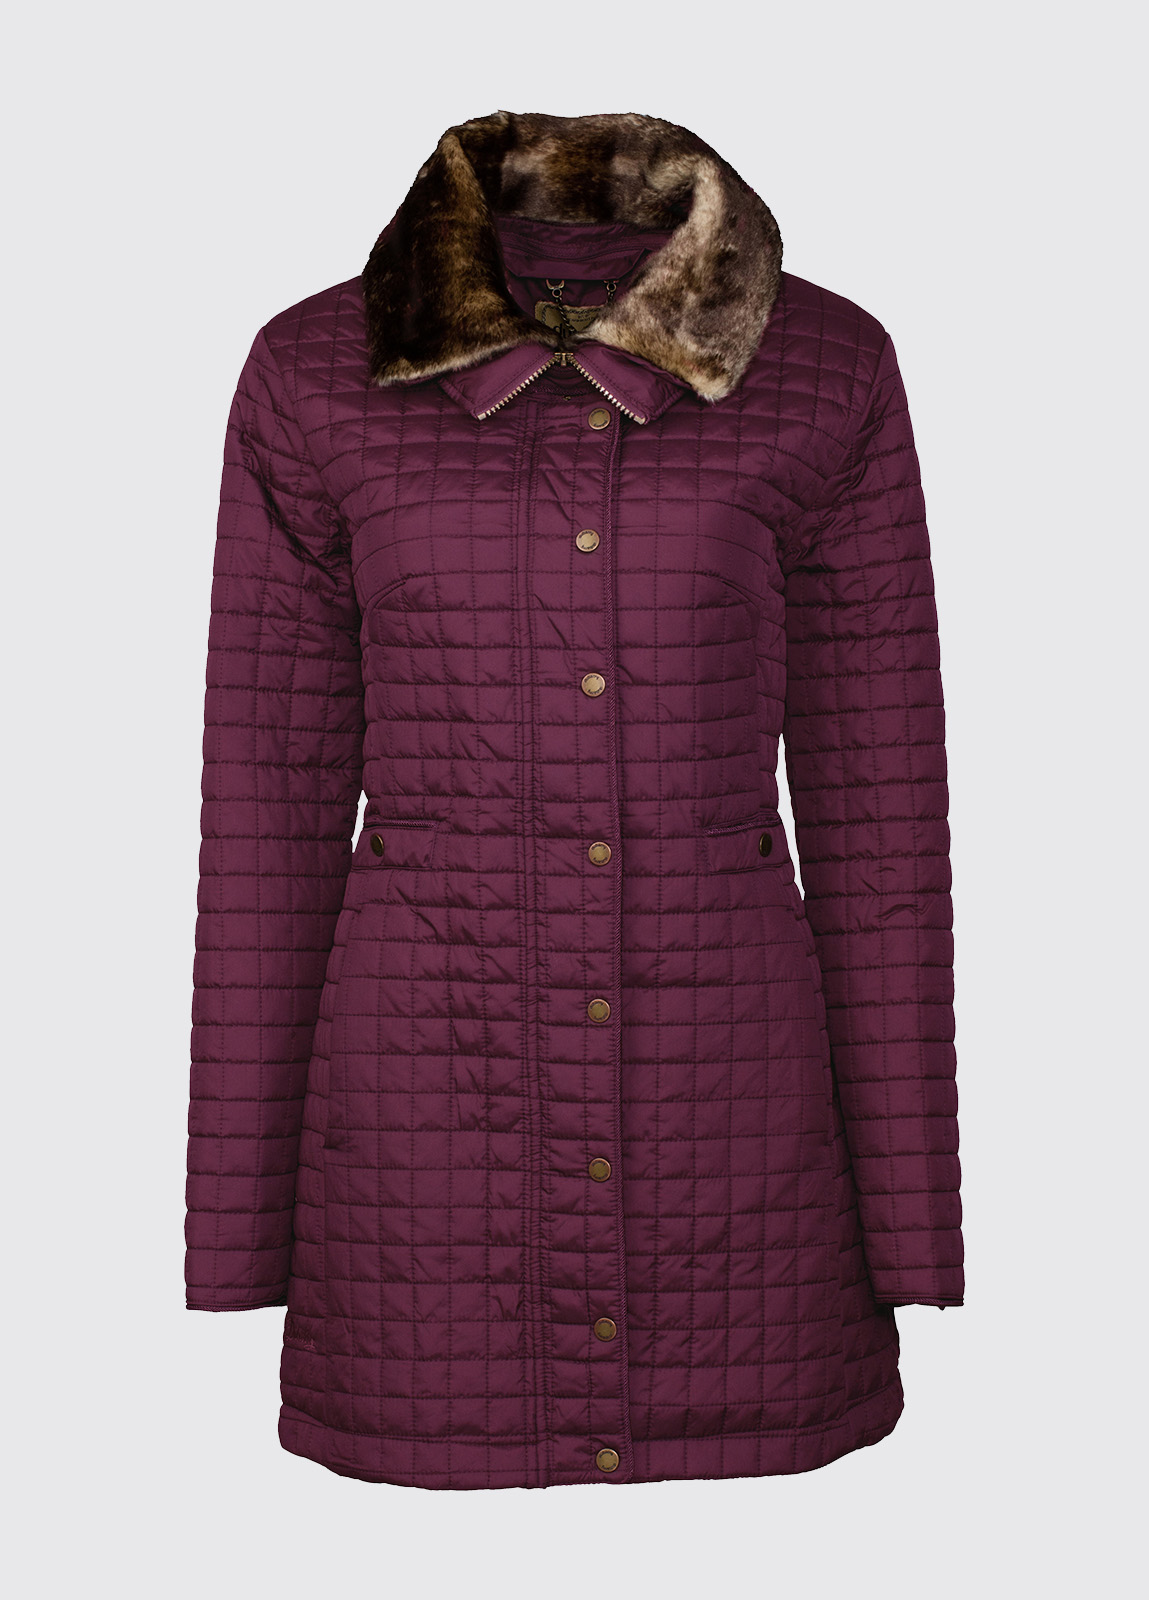 Abbey Women's Quilted Jacket - Malbec